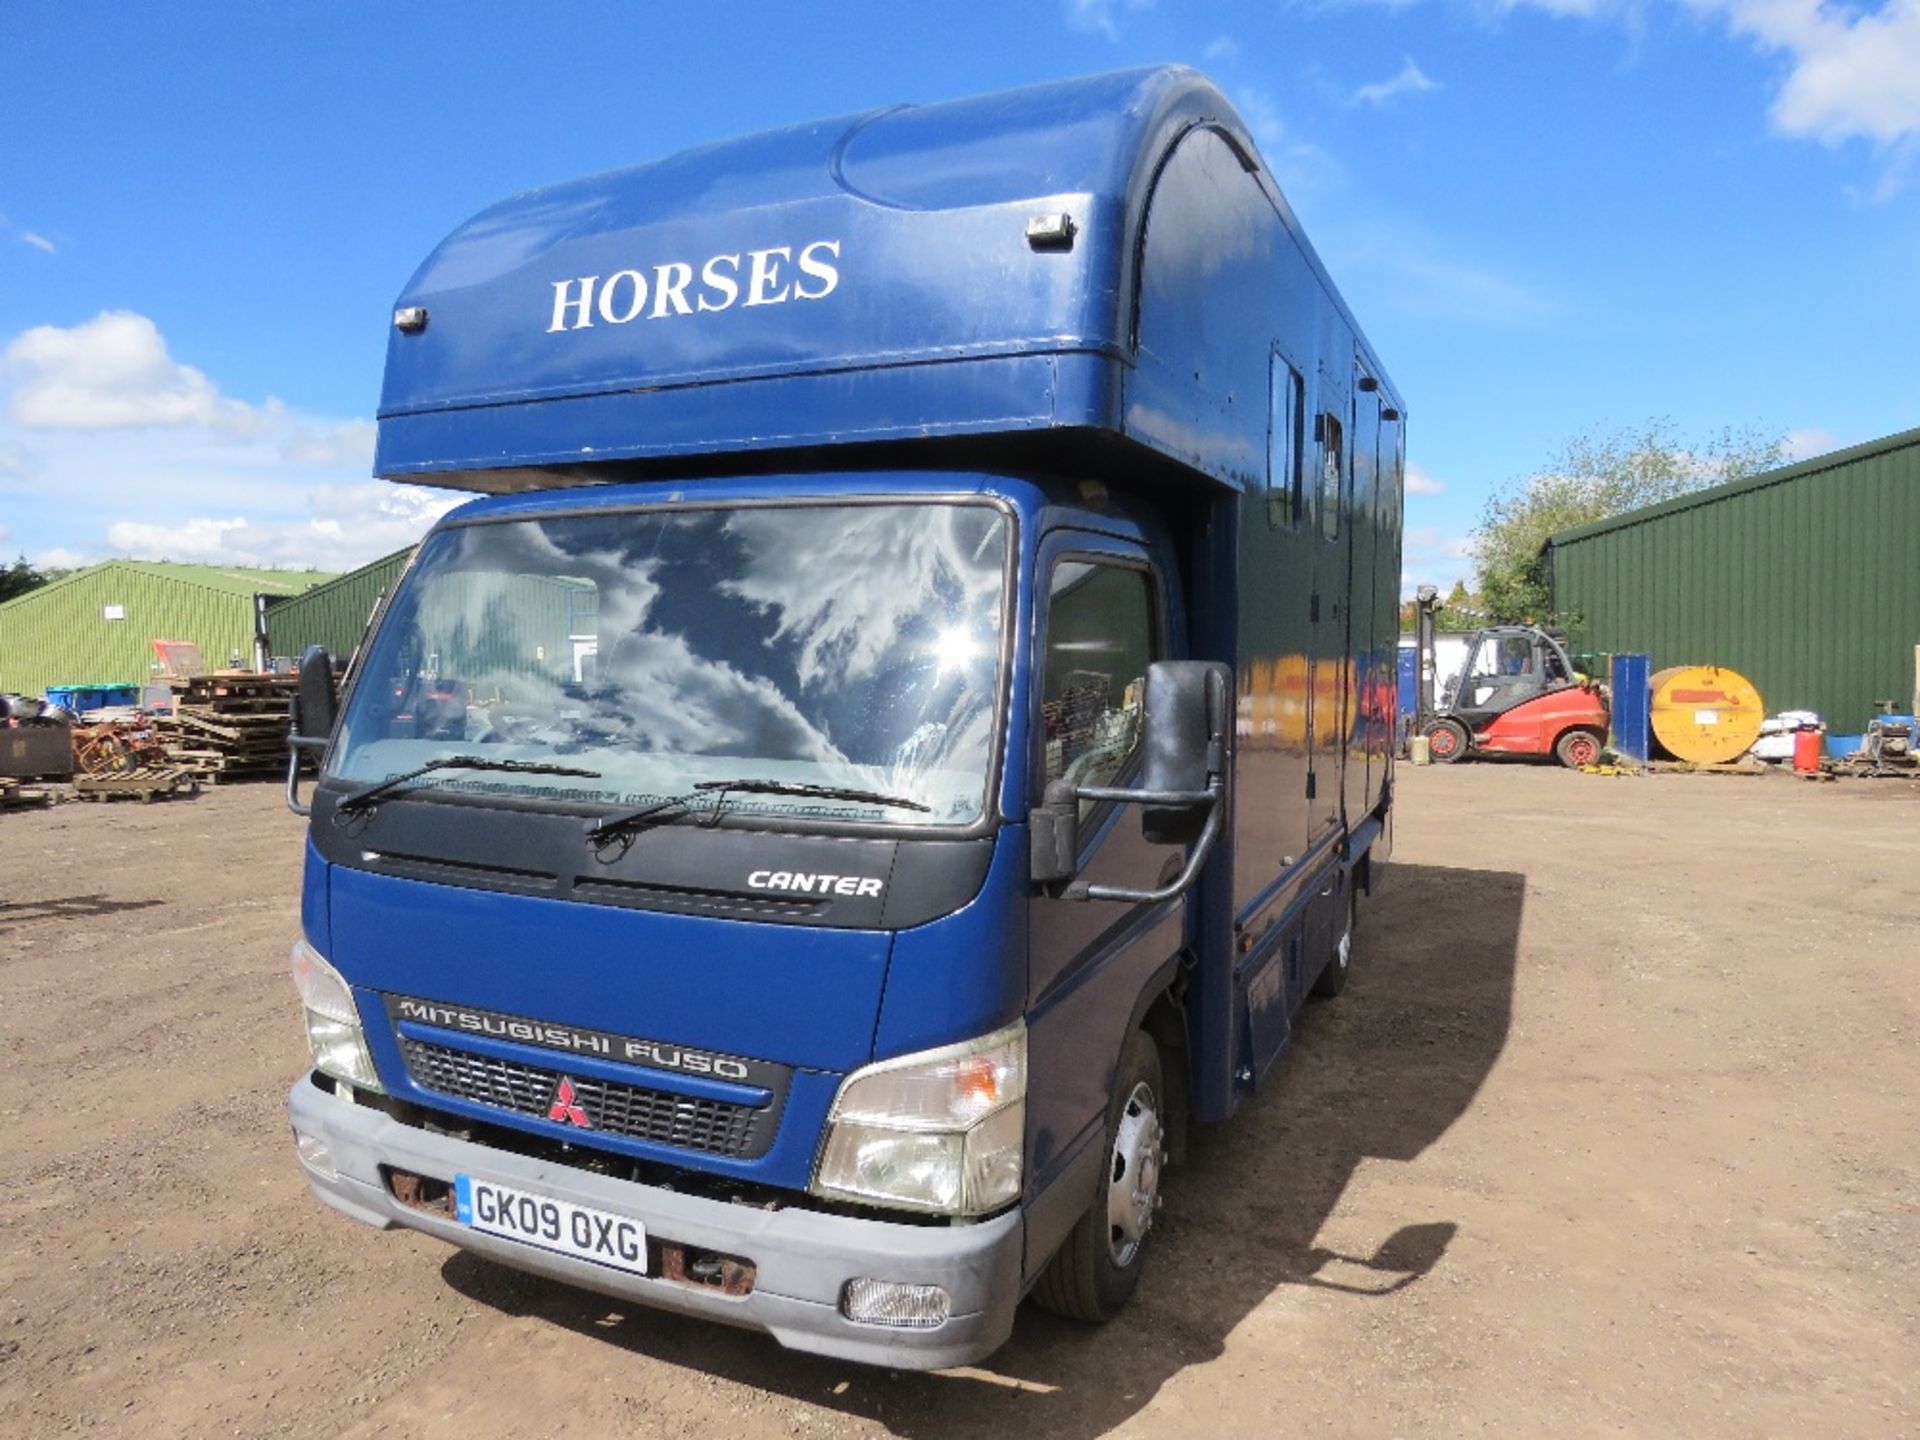 MITSUBISHI CANTER HORSE BOX LORRY REG:GK09 OXG. V5 AND PLATING CERTIFICATE IN OFFICE. MOT EXPIRED. - Image 4 of 24